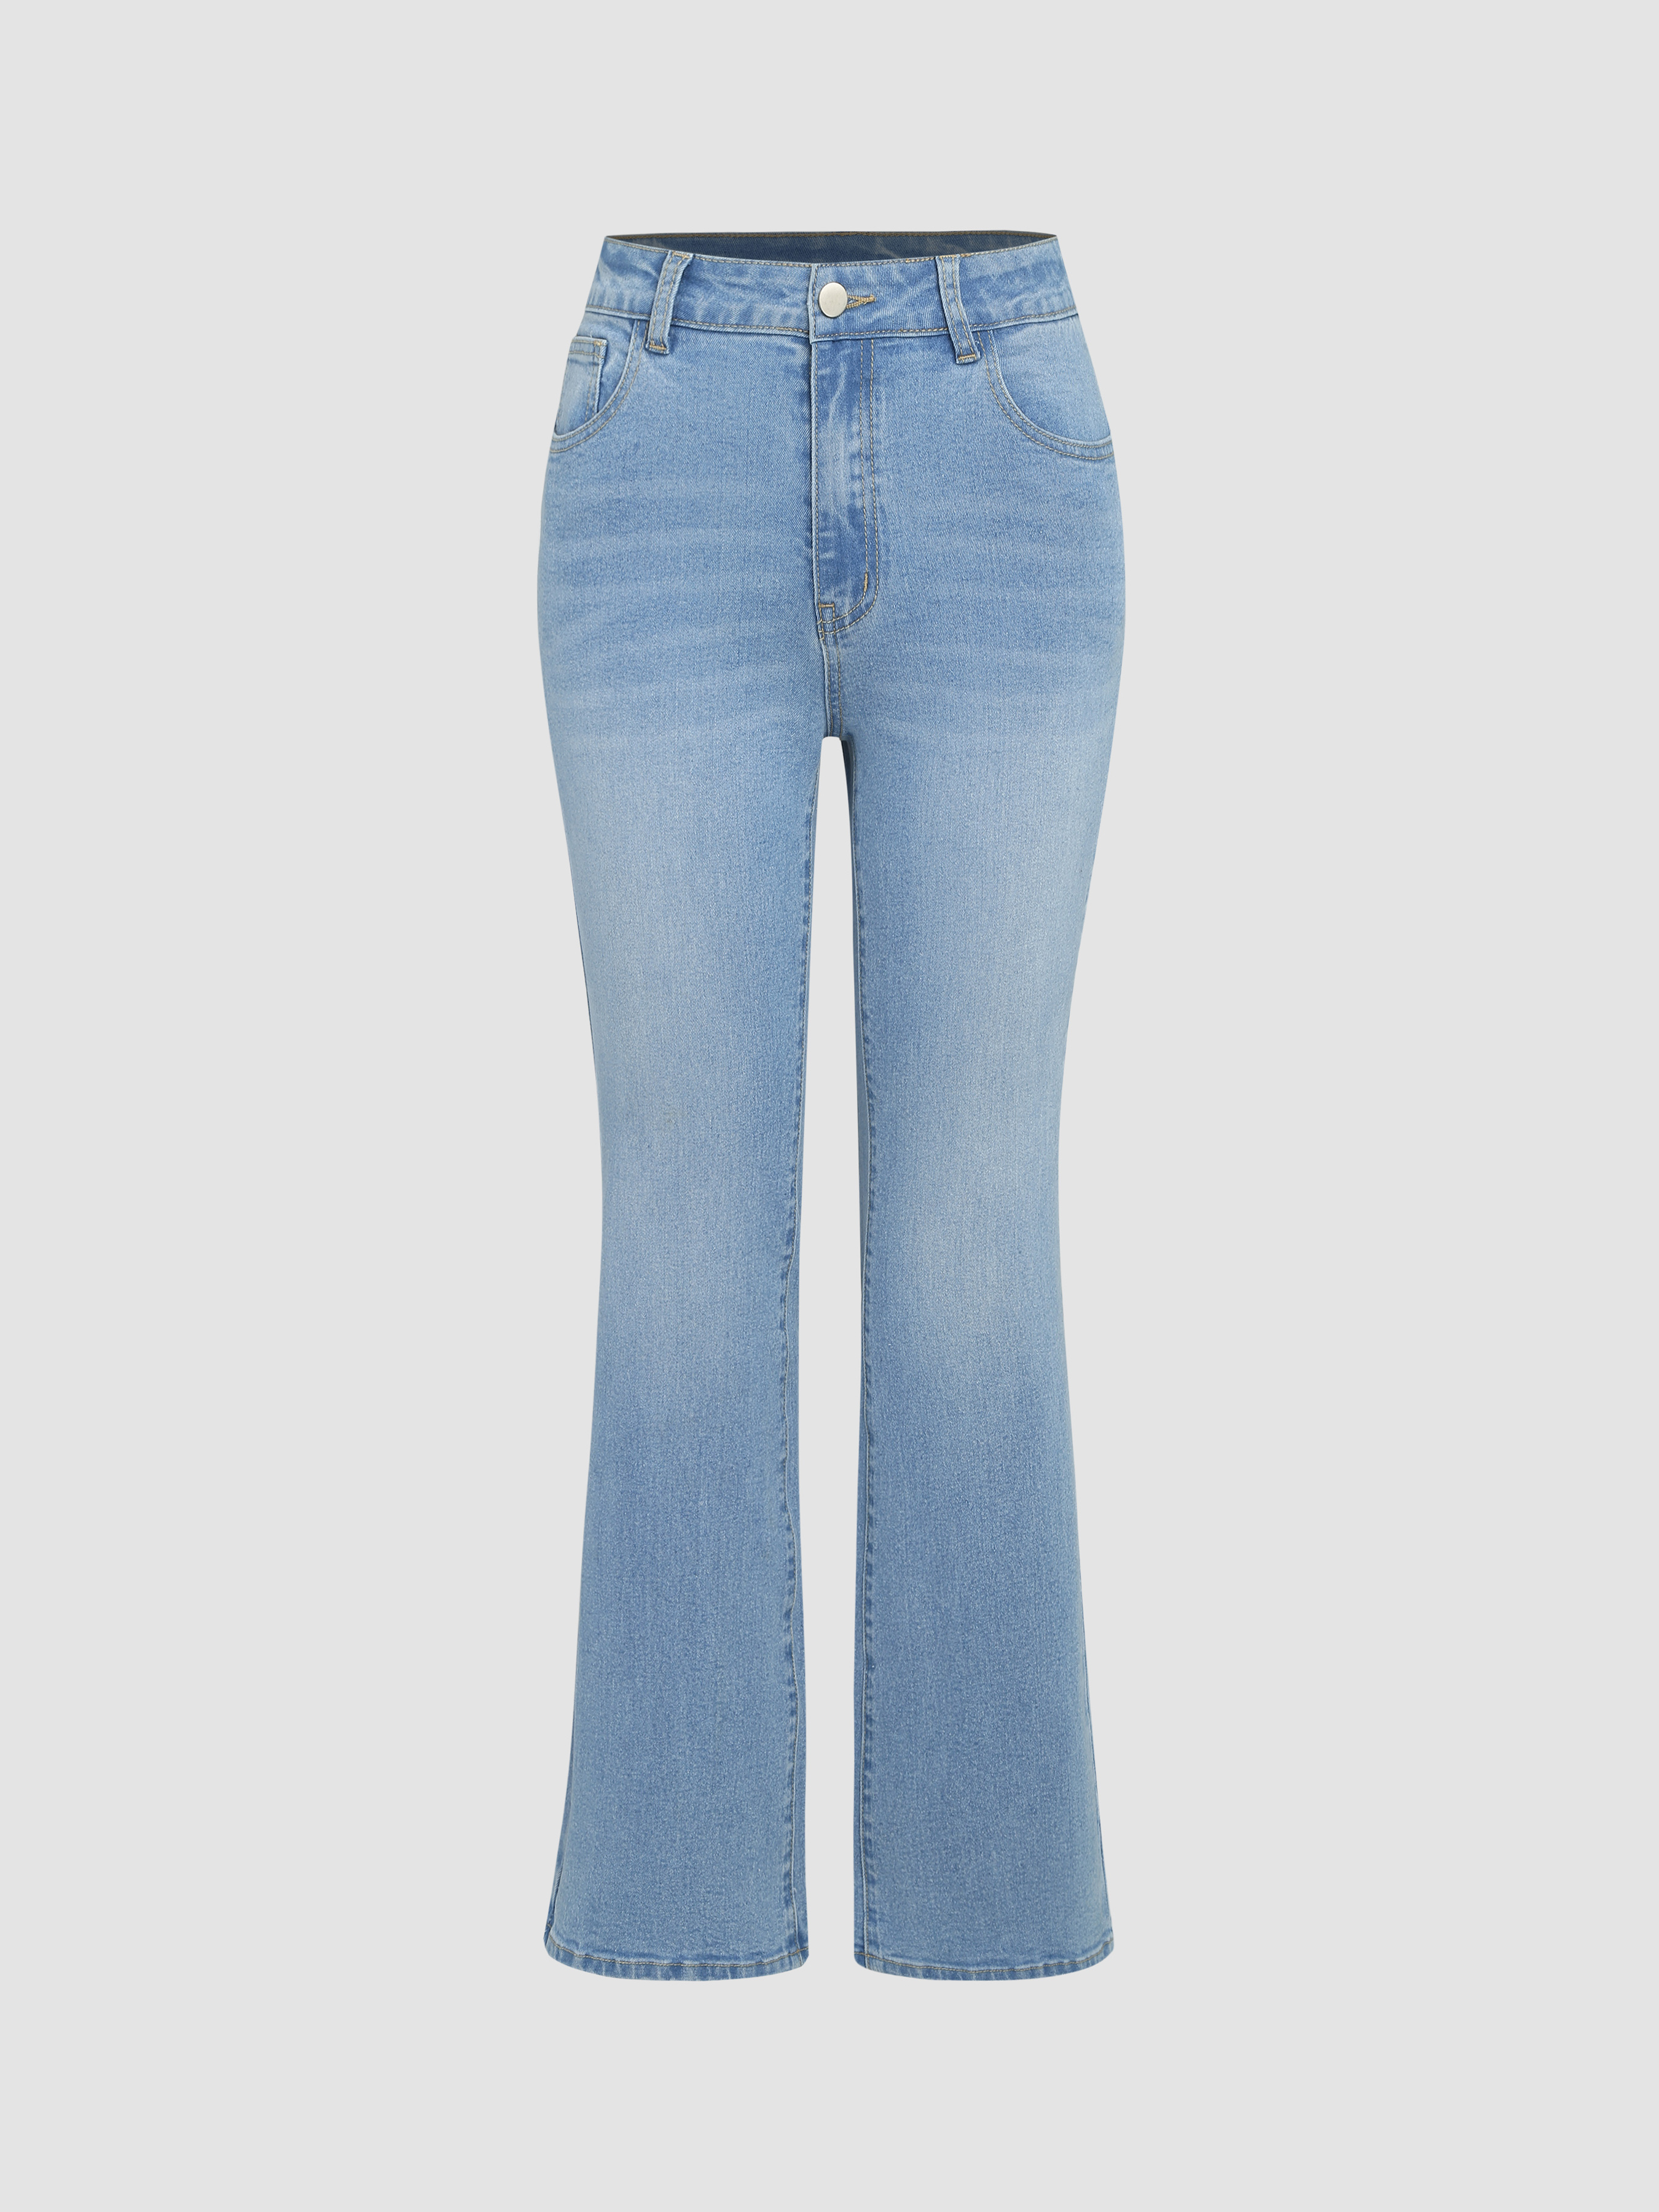 Cut Out Chain Detail Mid Waist Flared Jeans - Cider